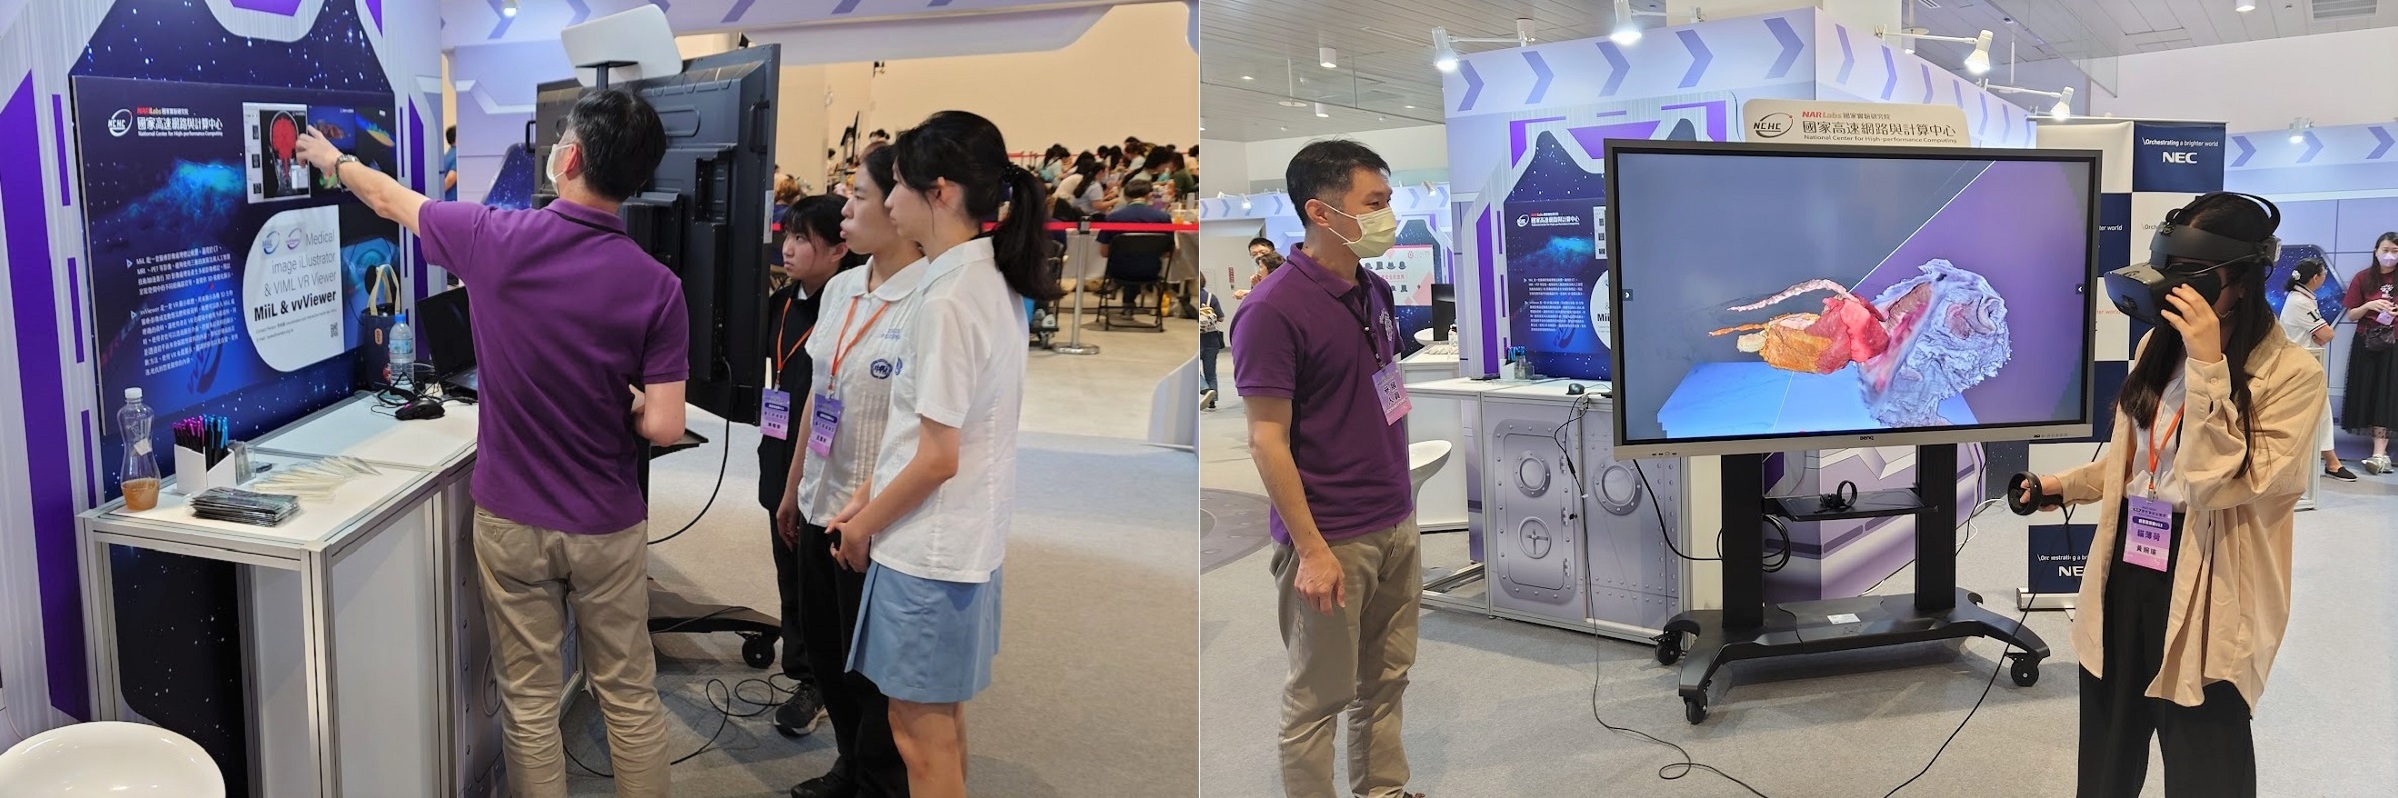 NARLabs National Center for High-performance Computing exhibited the results of a visual computing application. It showed that scientific experiments would be easier to observe when presented in virtual reality.